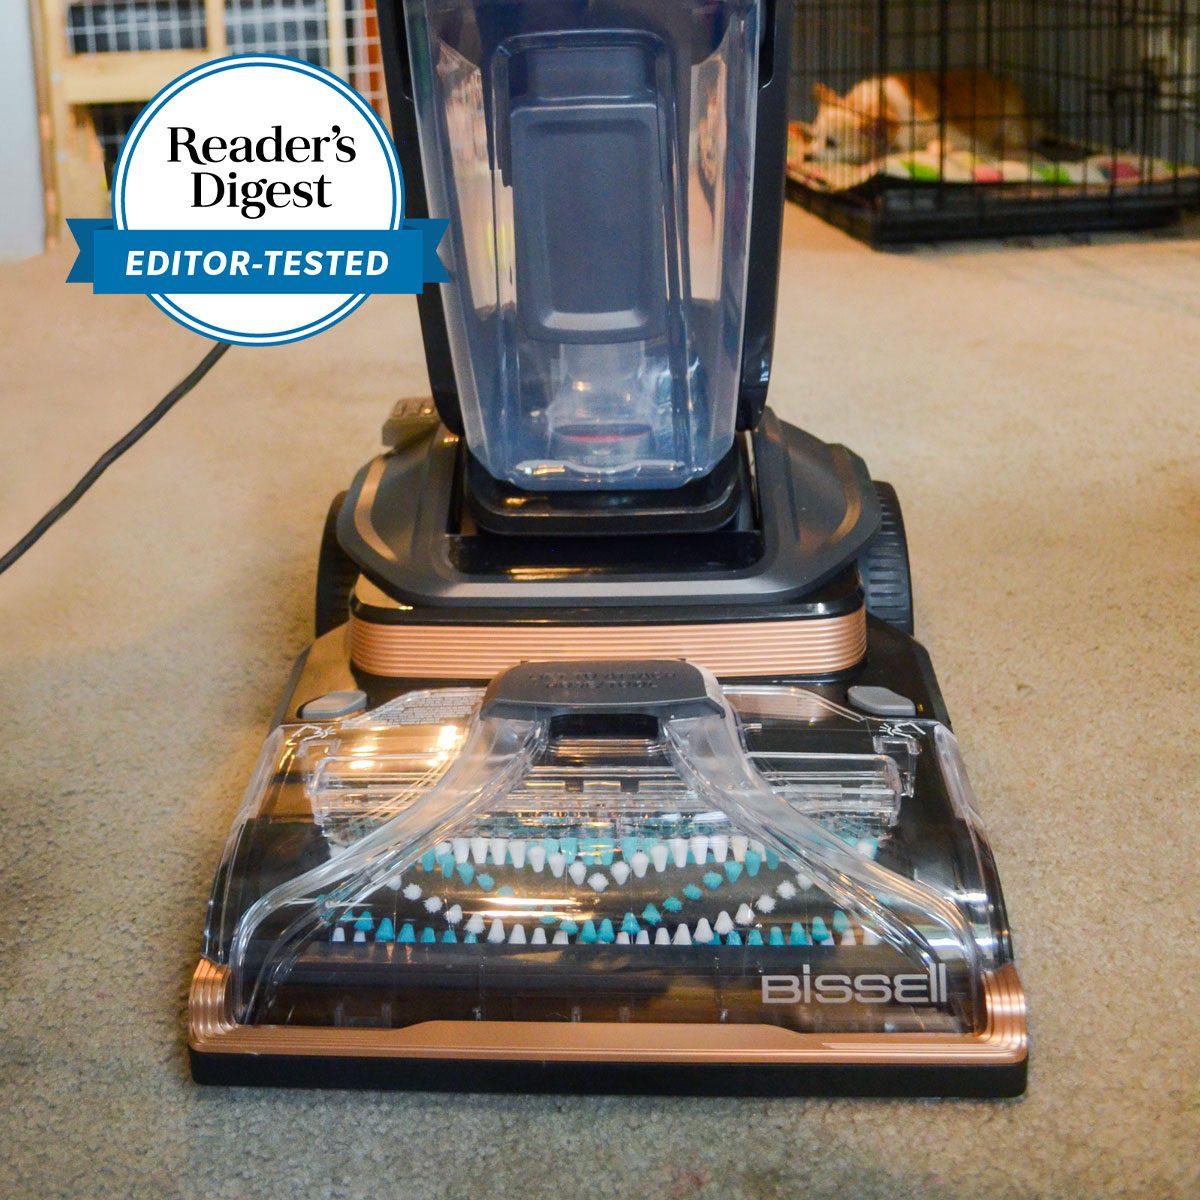 5 Best Bissell Carpet Cleaner Models 2023, Tested and Reviewed